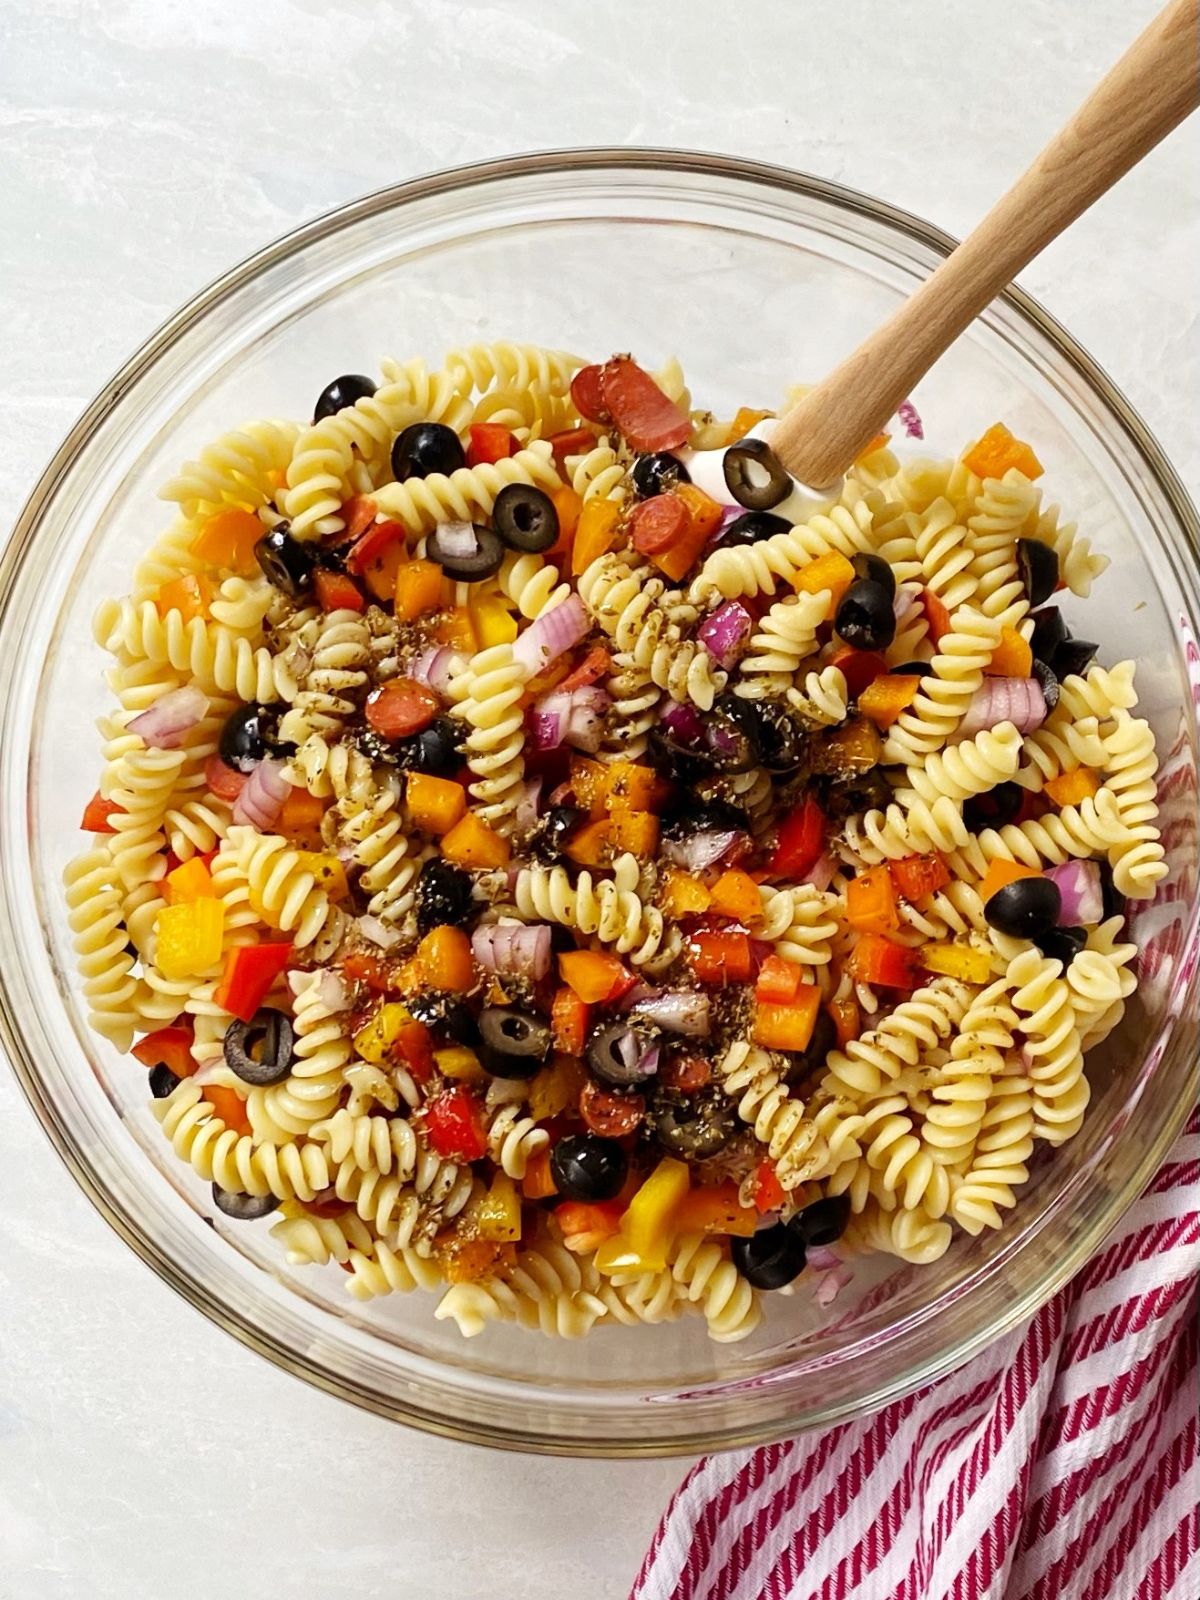 Bowl of pasta salad ingredients mixed together.